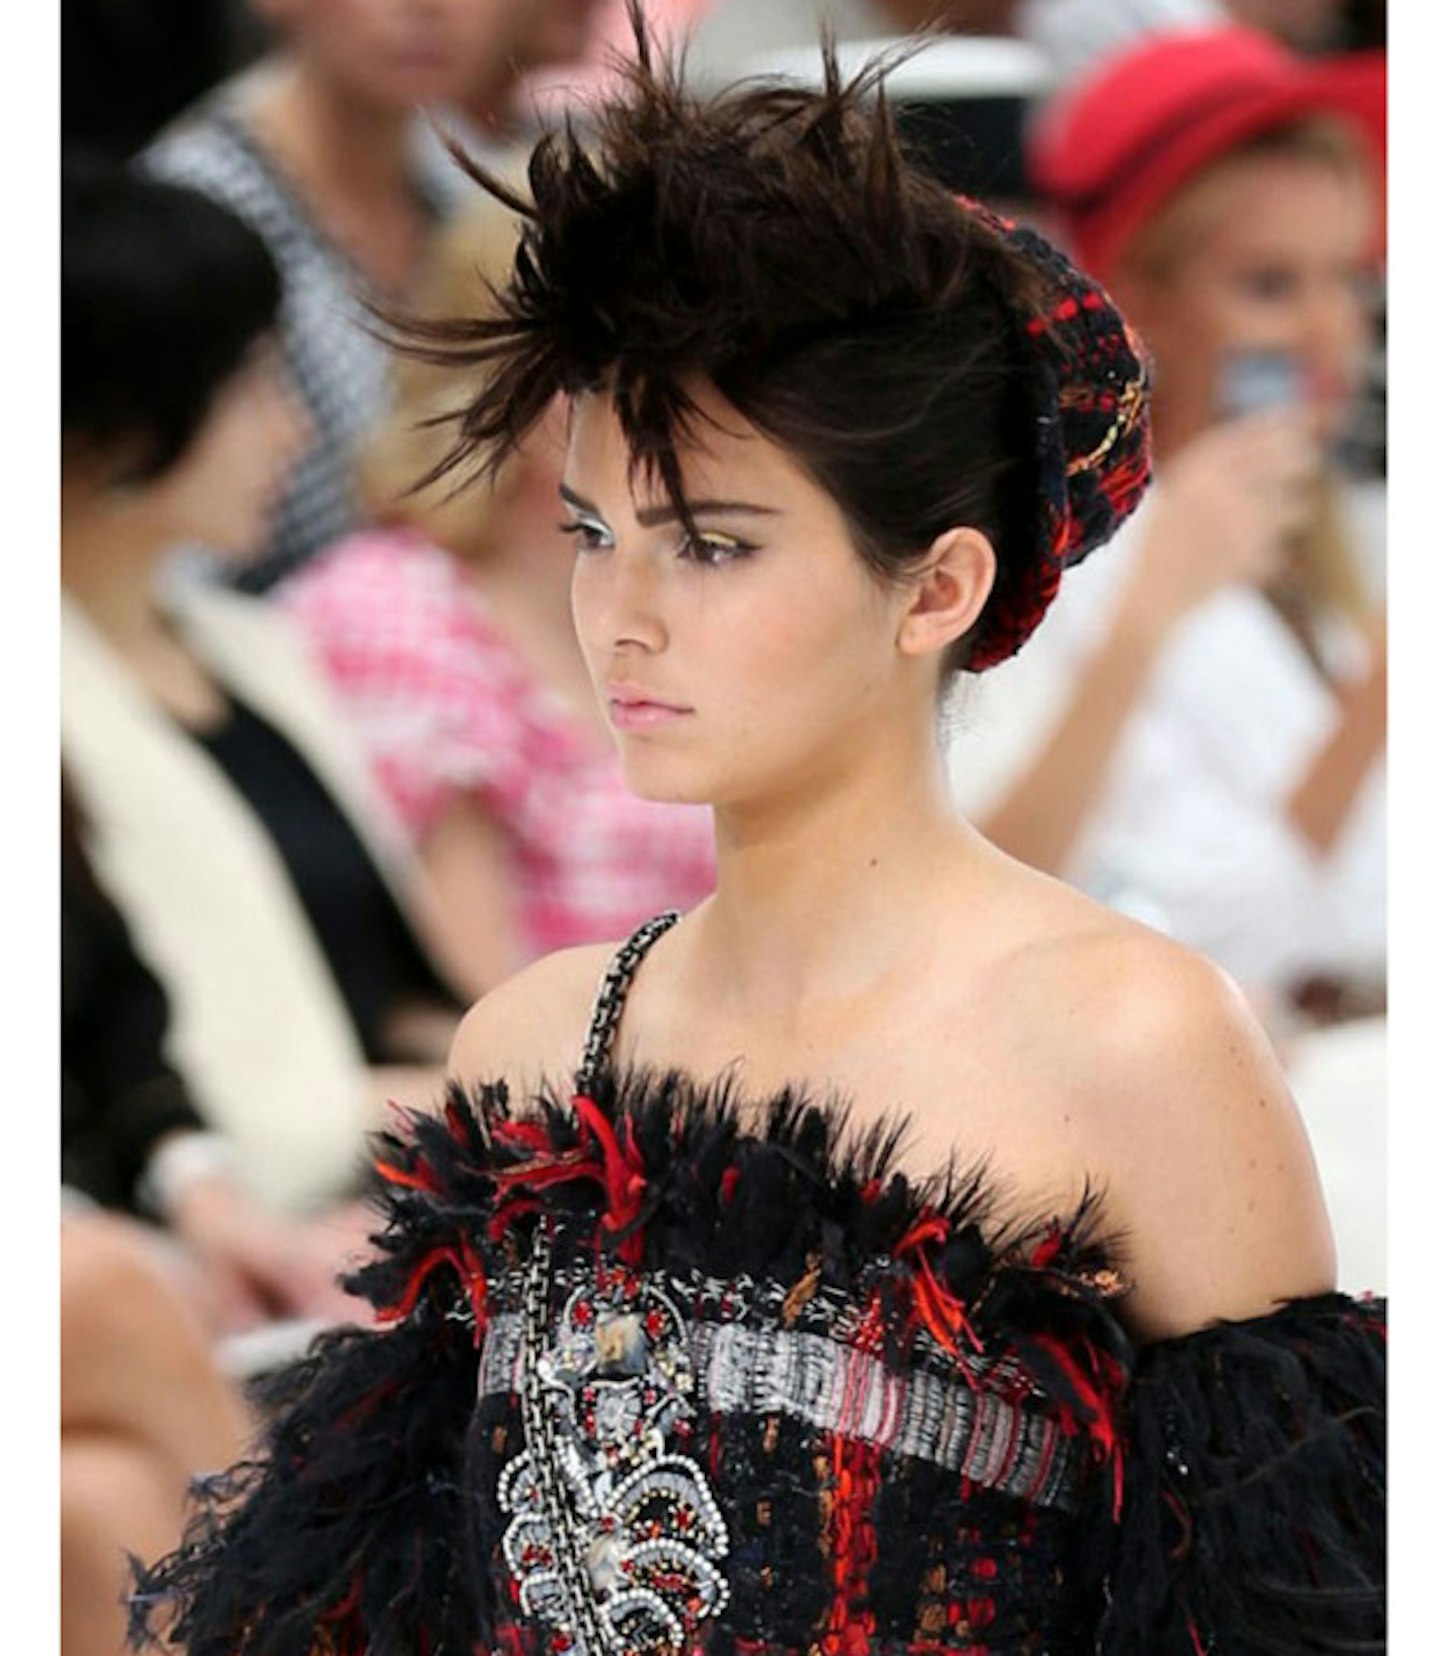 kendall-jenner-chanel-couture-show-aw-14-punk-hair-tartan-fringe-dress